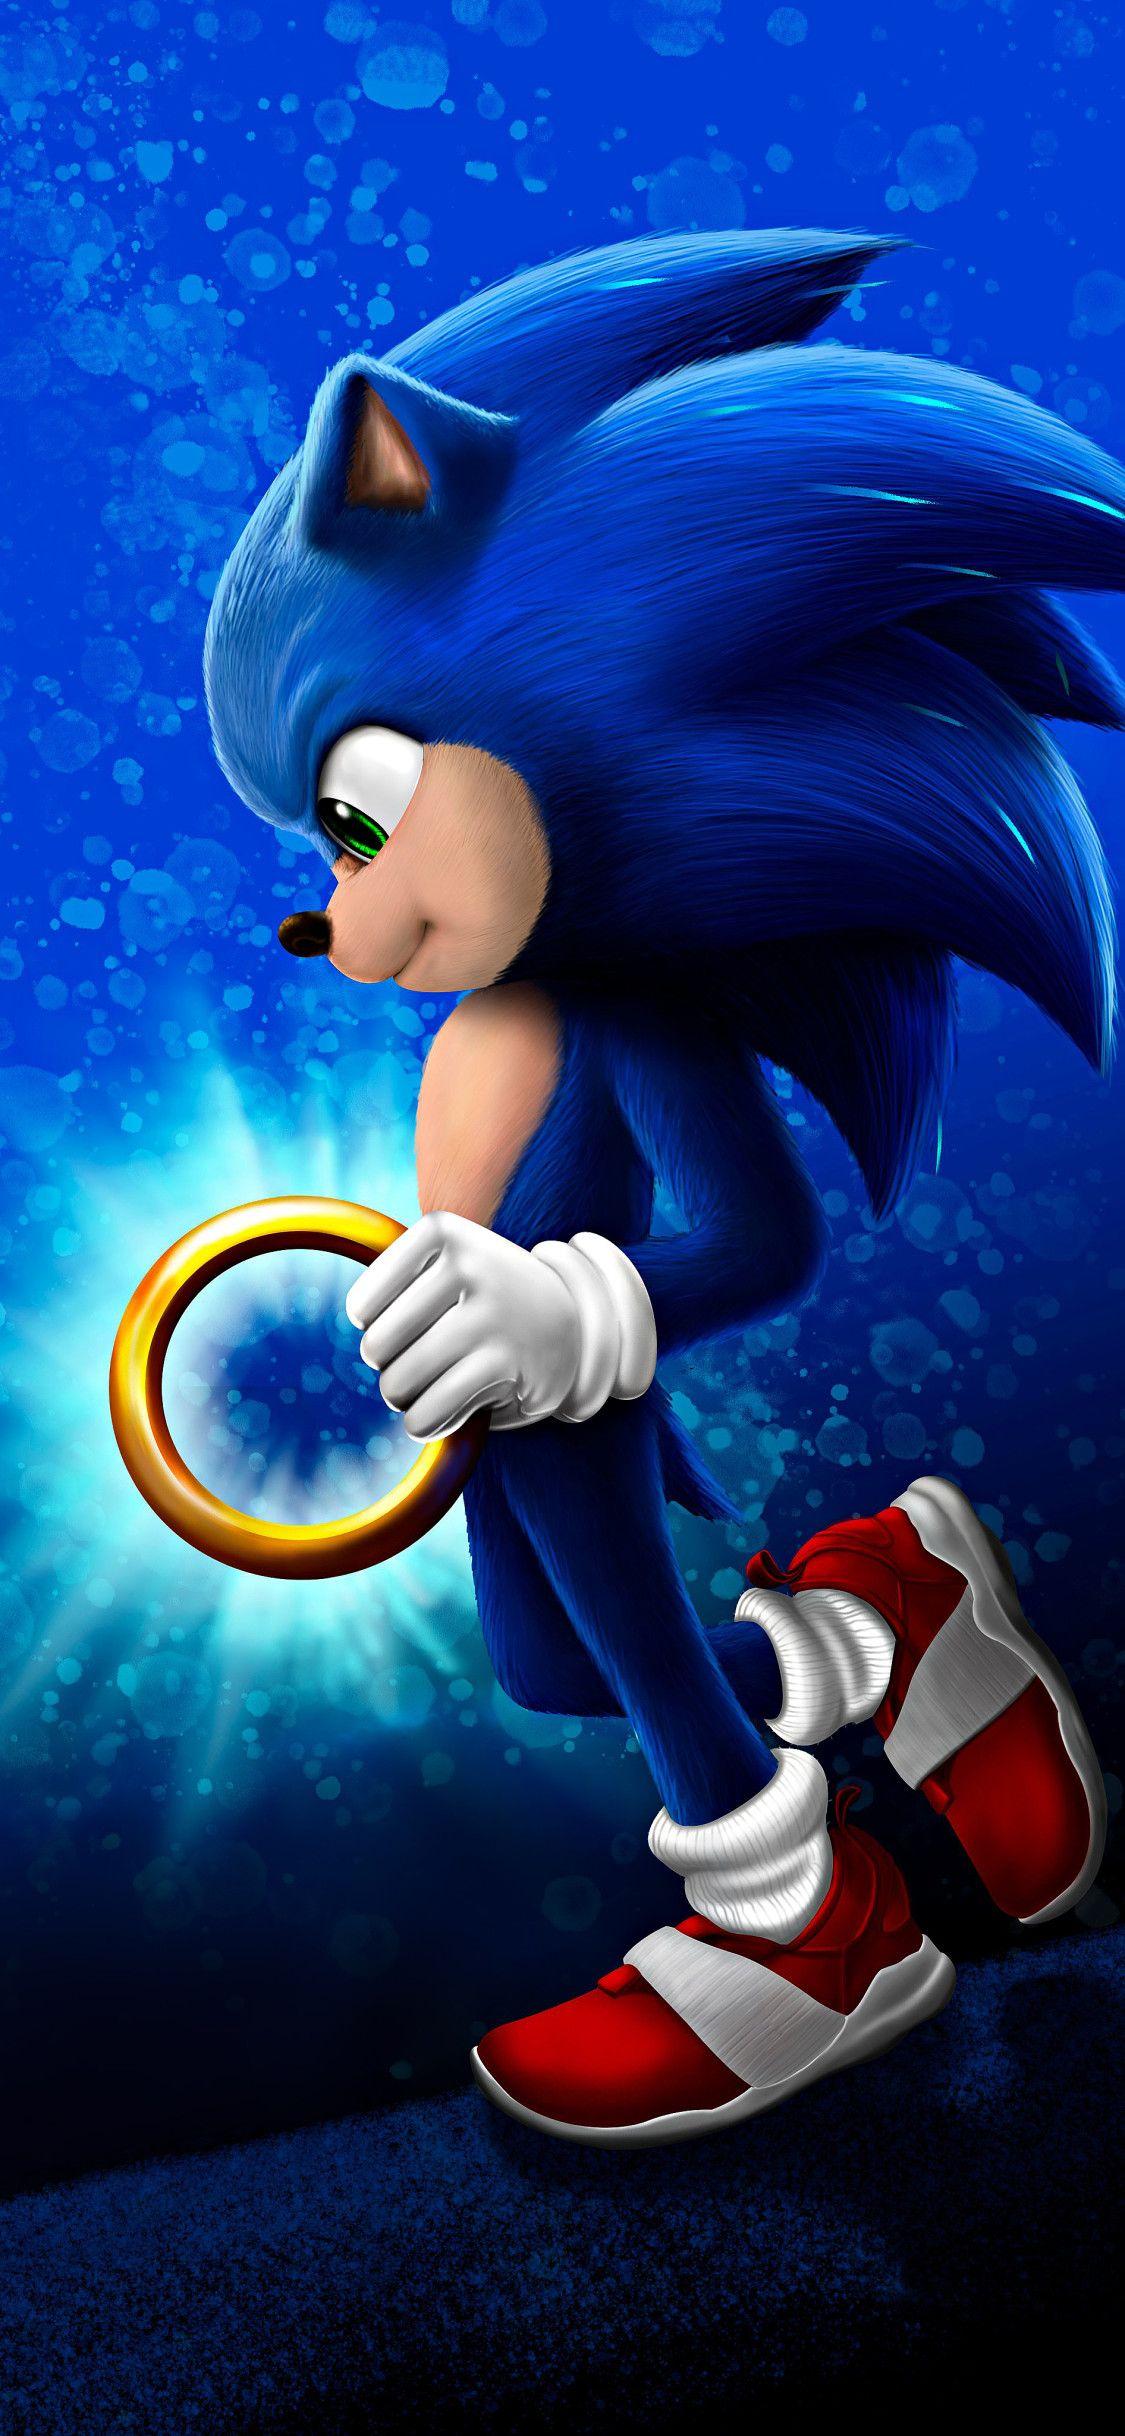 Sonic Movie Iphone Wallpapers Top Free Sonic Movie Iphone Backgrounds Wallpaperaccess